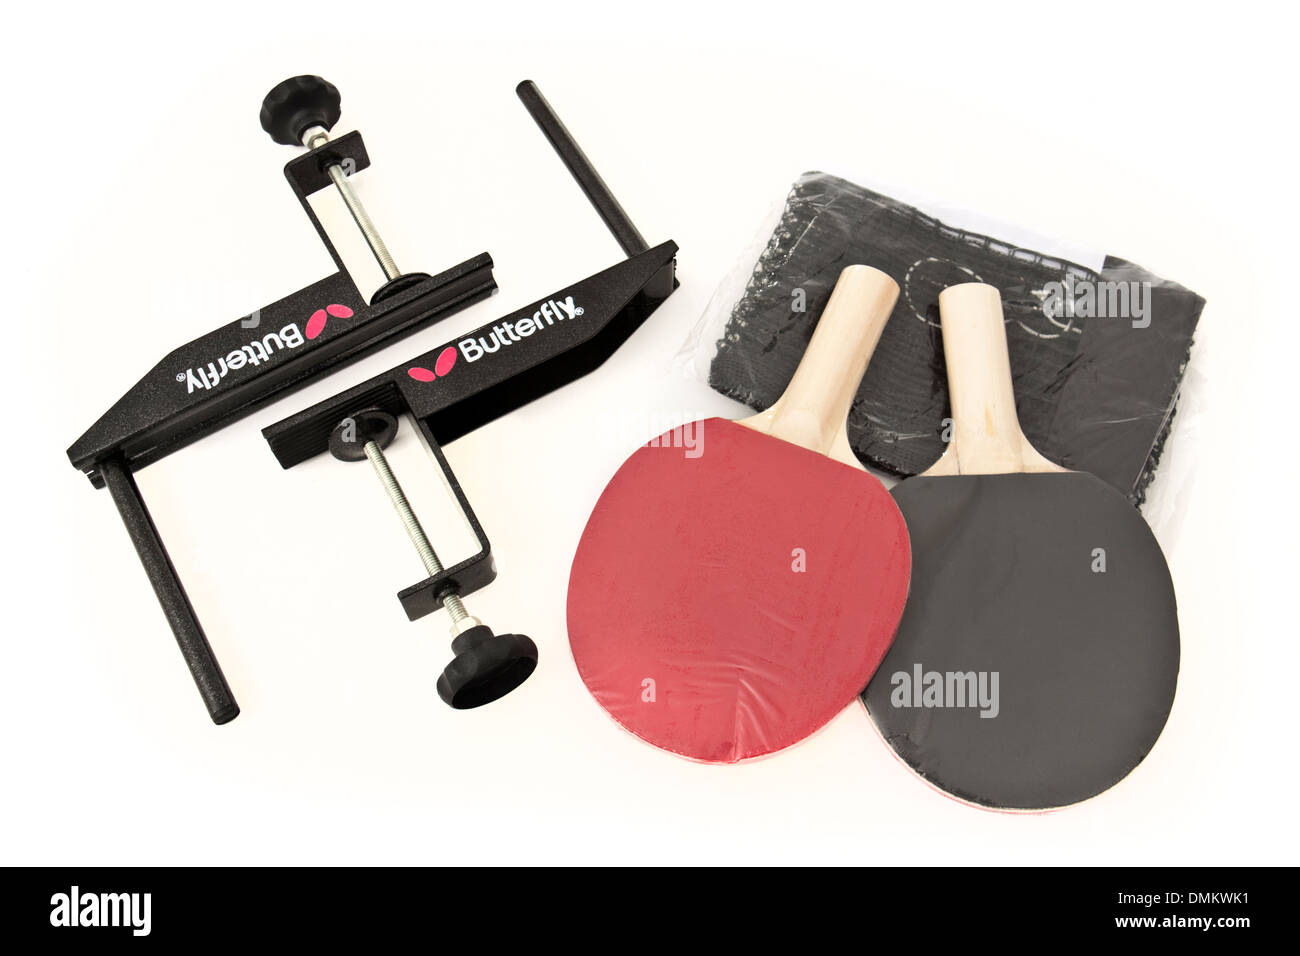 Table tennis set, including a pair of rackets, table clamps and net Stock Photo